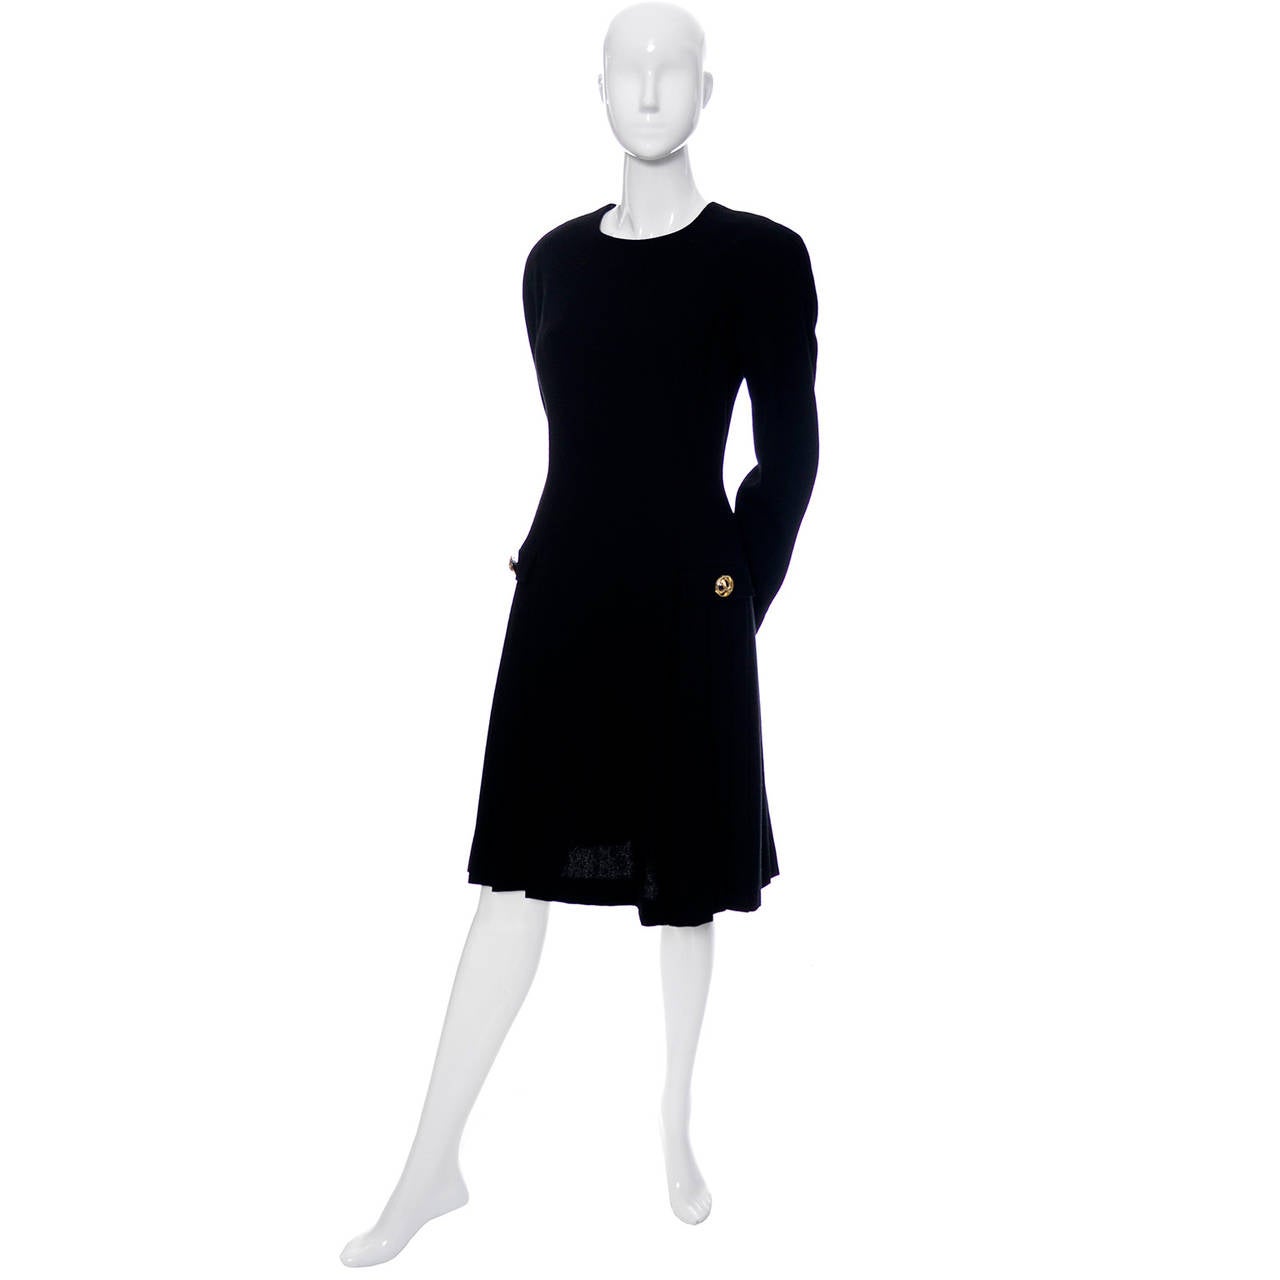 This is a classic vintage black dress from Arnold Scaasi. The drop waist black wool knit dress is fully lined and is from the early 1980's. The dress has a pretty pleated skirt, dolman sleeves, and a back zipper. This dress is in excellent condition